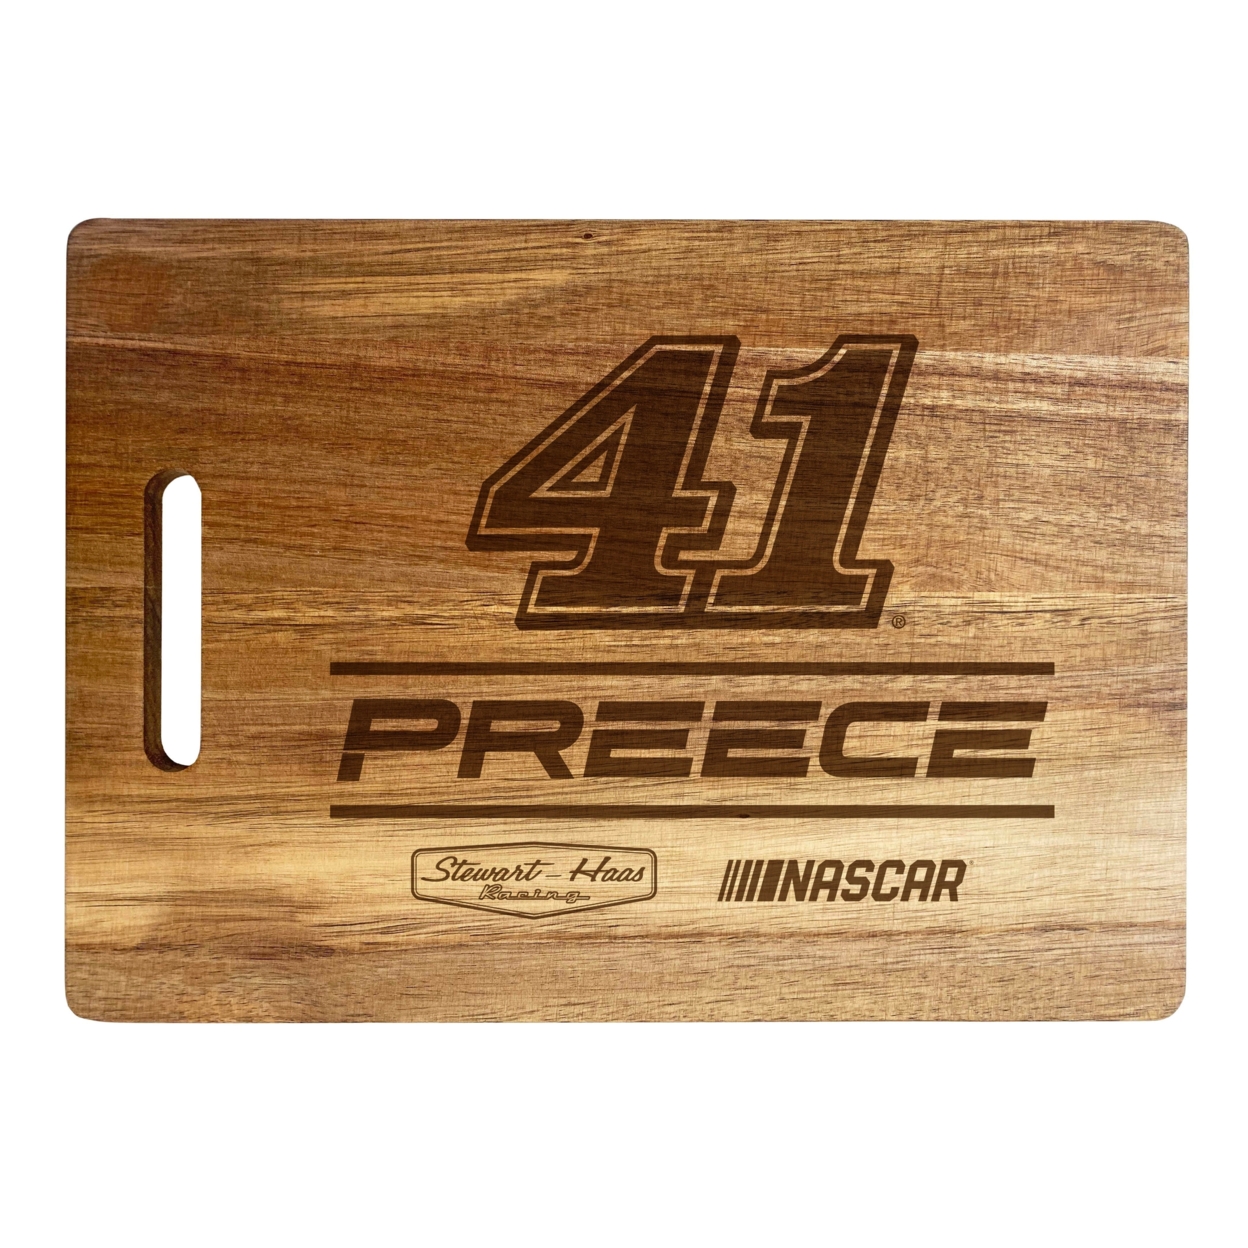 #41 Ryan Preece NASCAR Officially Licensed Engraved Wooden Cutting Board